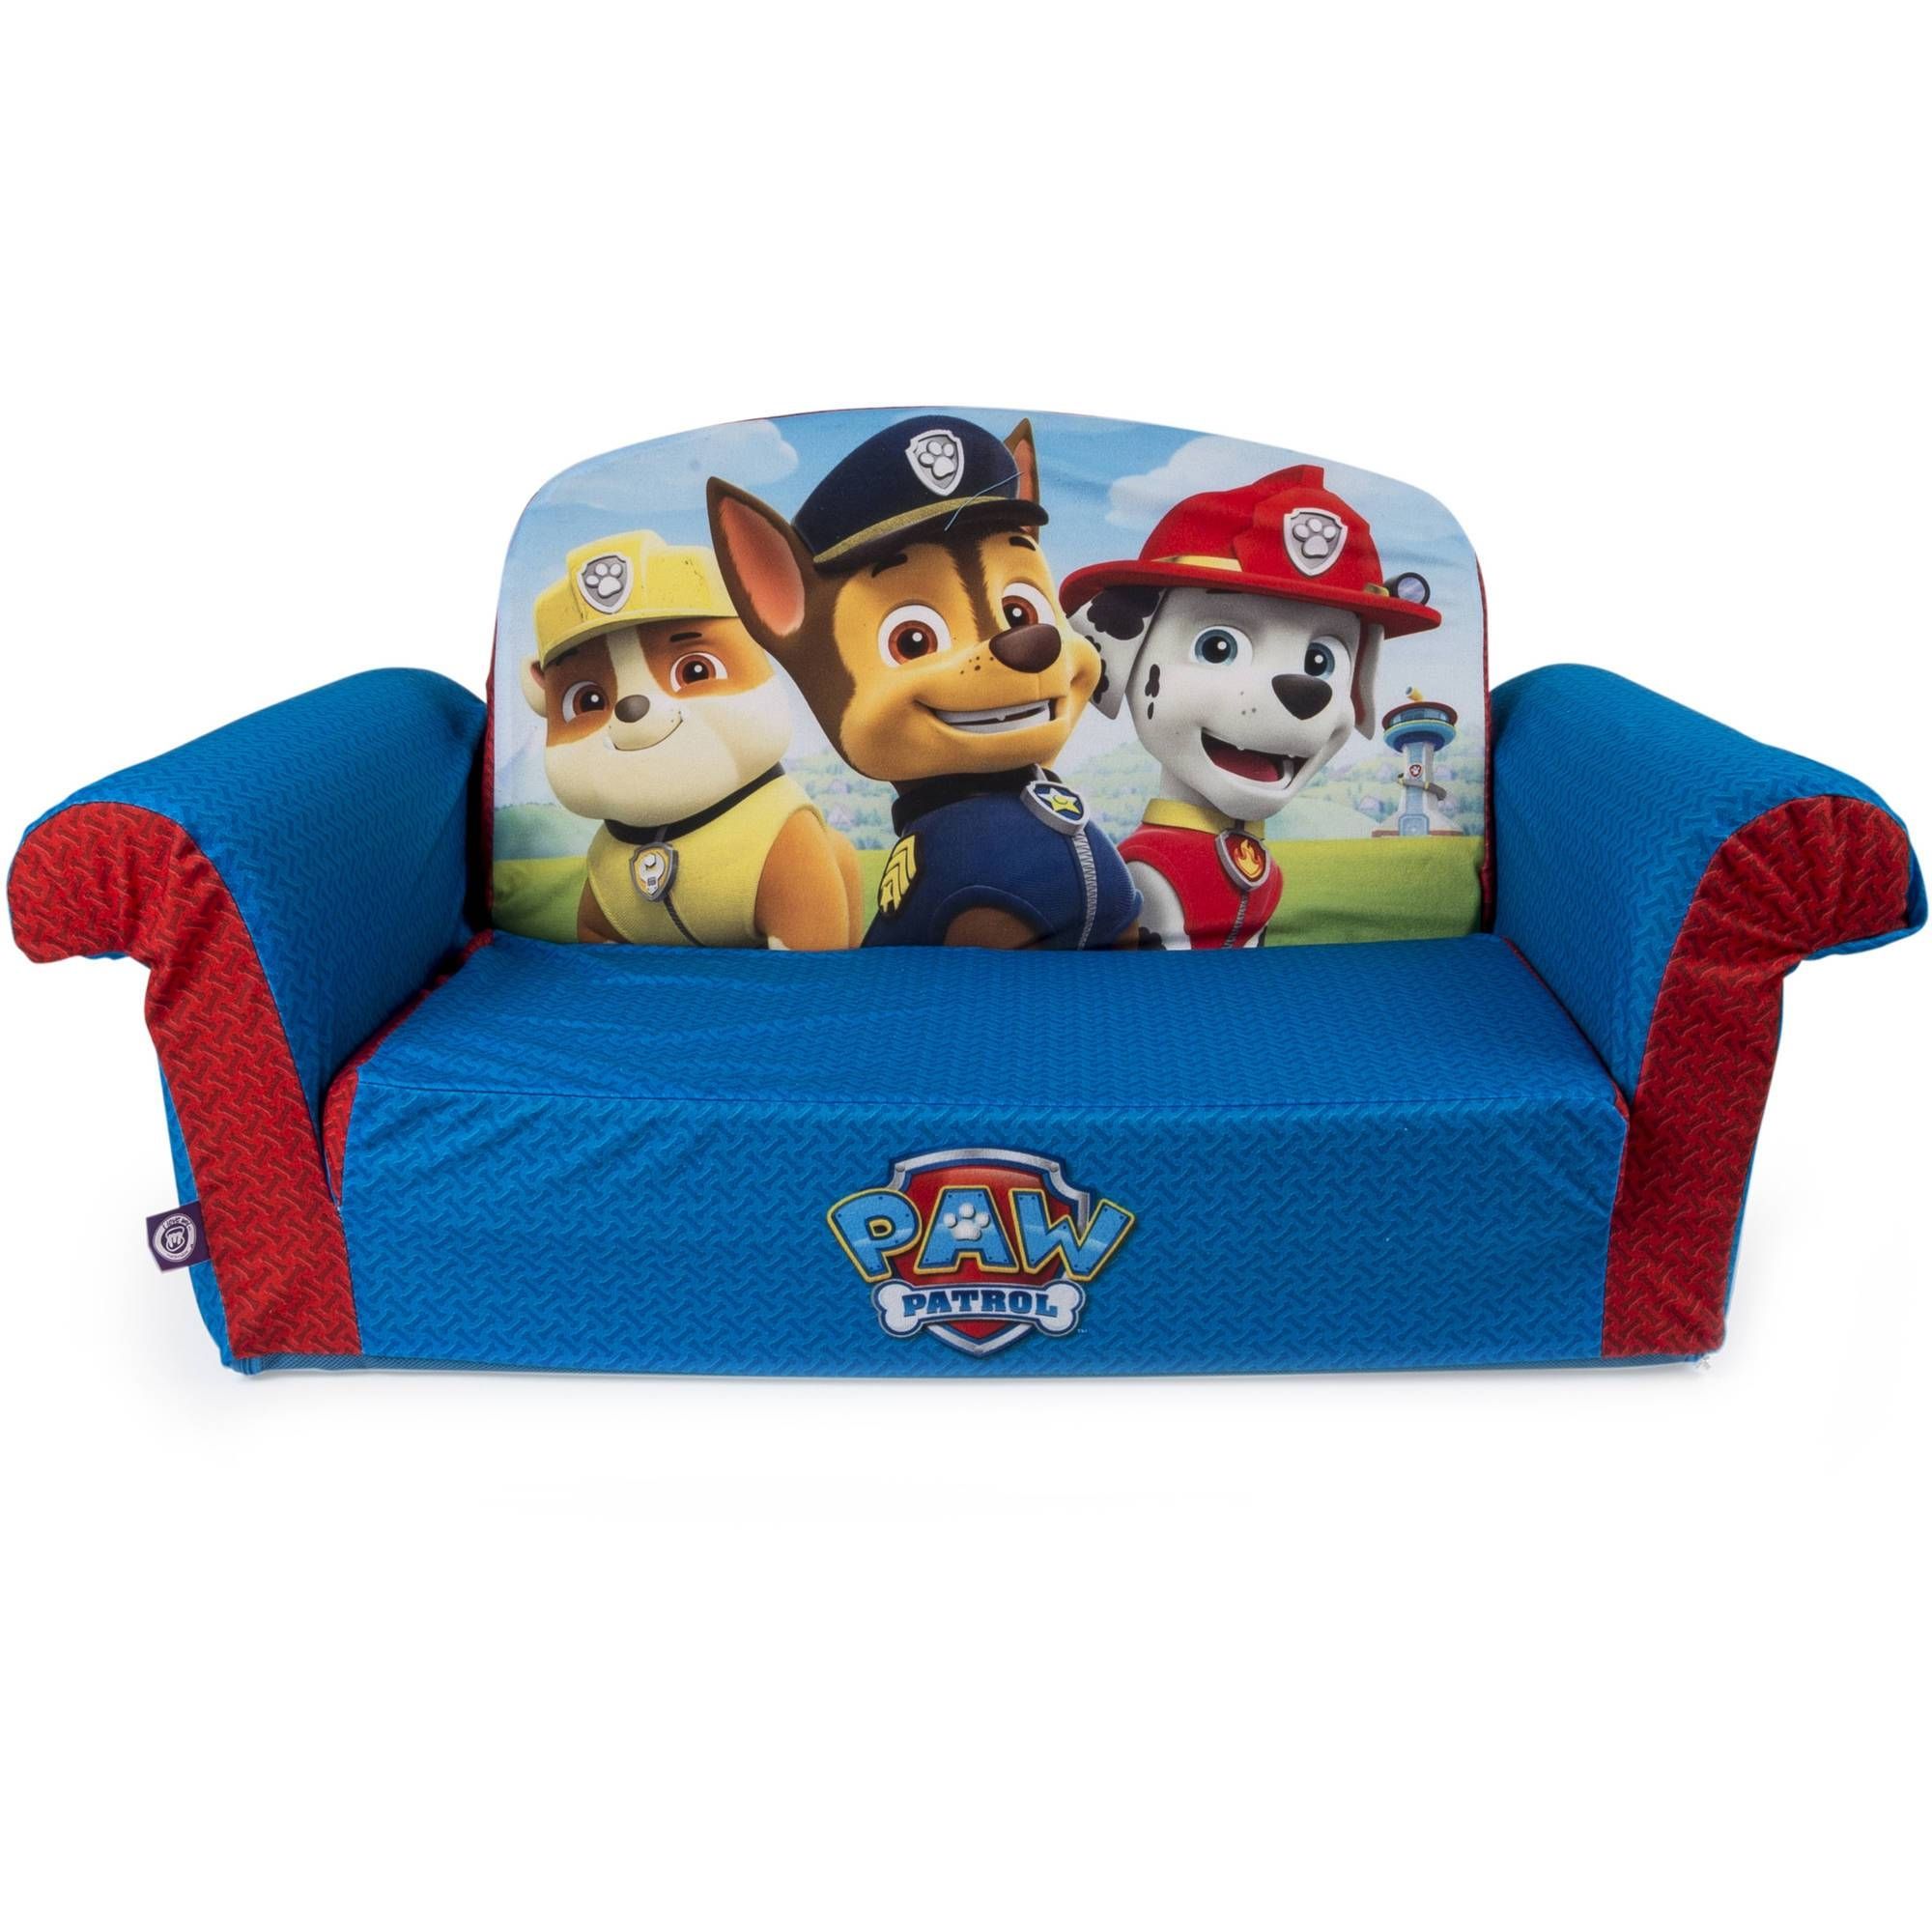 Marshmallow Furniture, Children's 2 In 1 Flip Open Foam Sofa Intended For Flip Open Sofas For Toddlers (View 12 of 15)